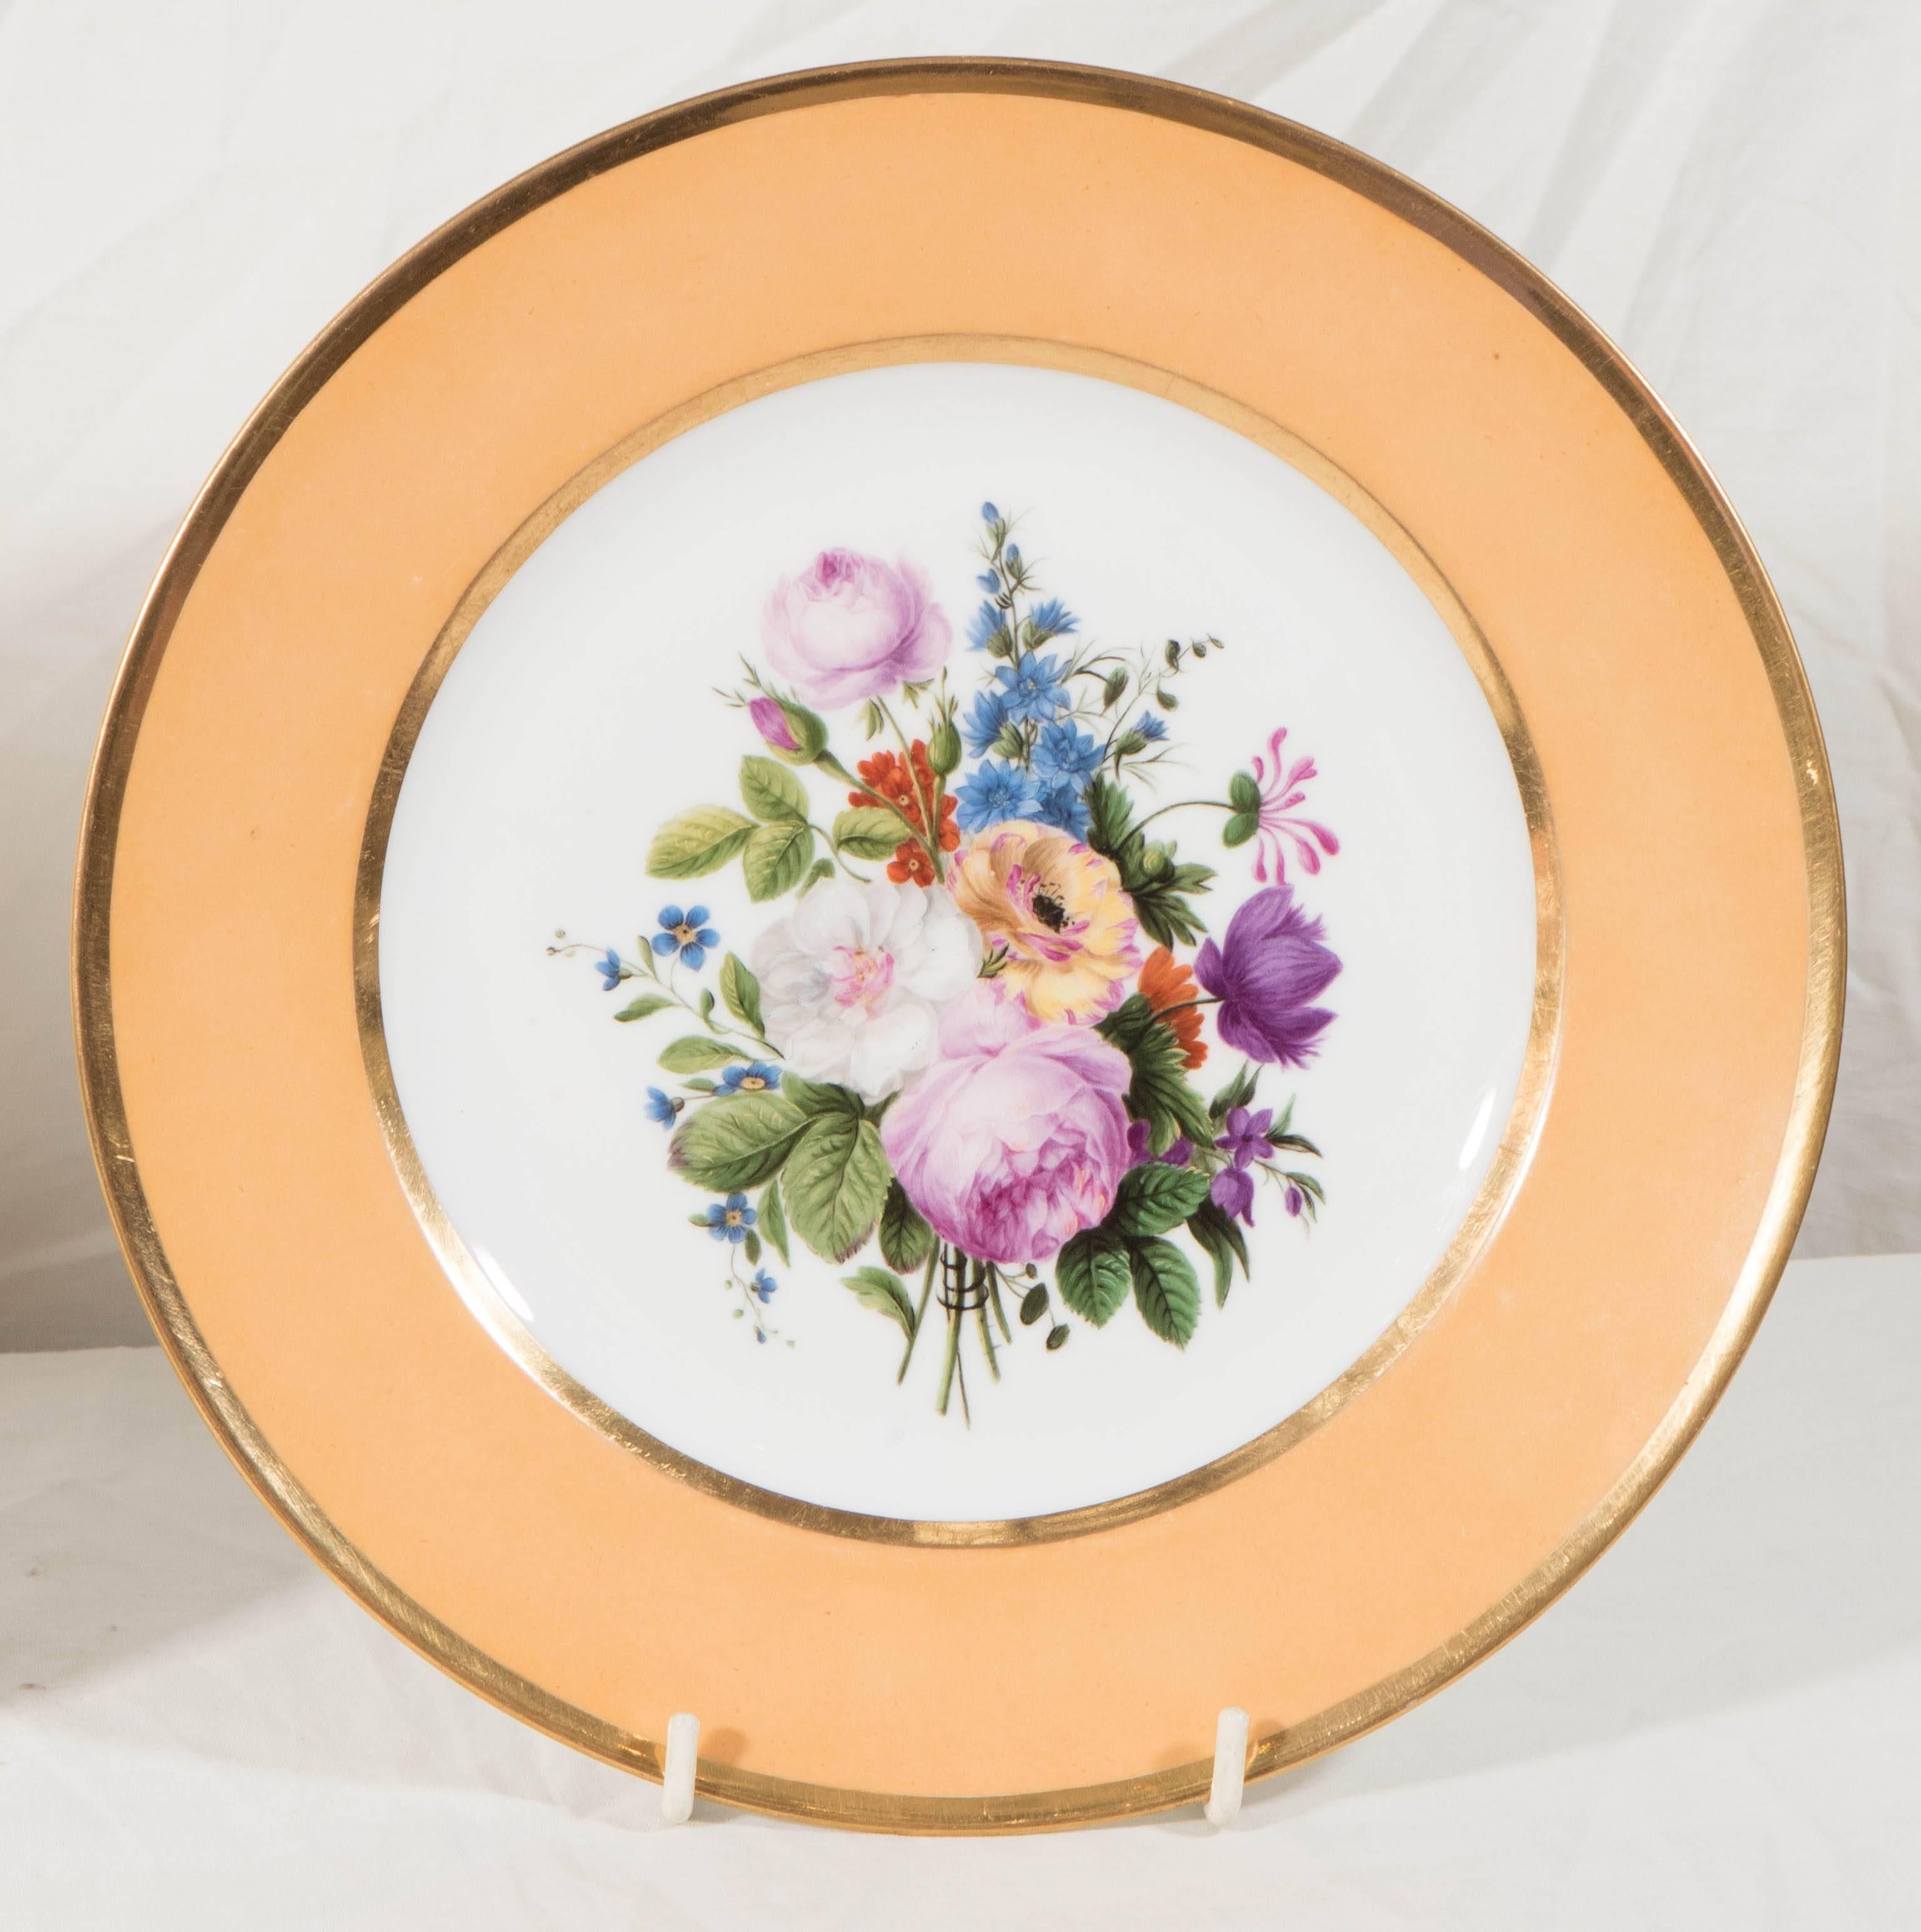 We are pleased to offer a pair of beautiful Sèvres porcelain dishes each with a hand-painted bouquet of exceptionally well painted flowers in soft pinks, blue, purple, and yellow. The center bouquets are complemented by a rich apricot